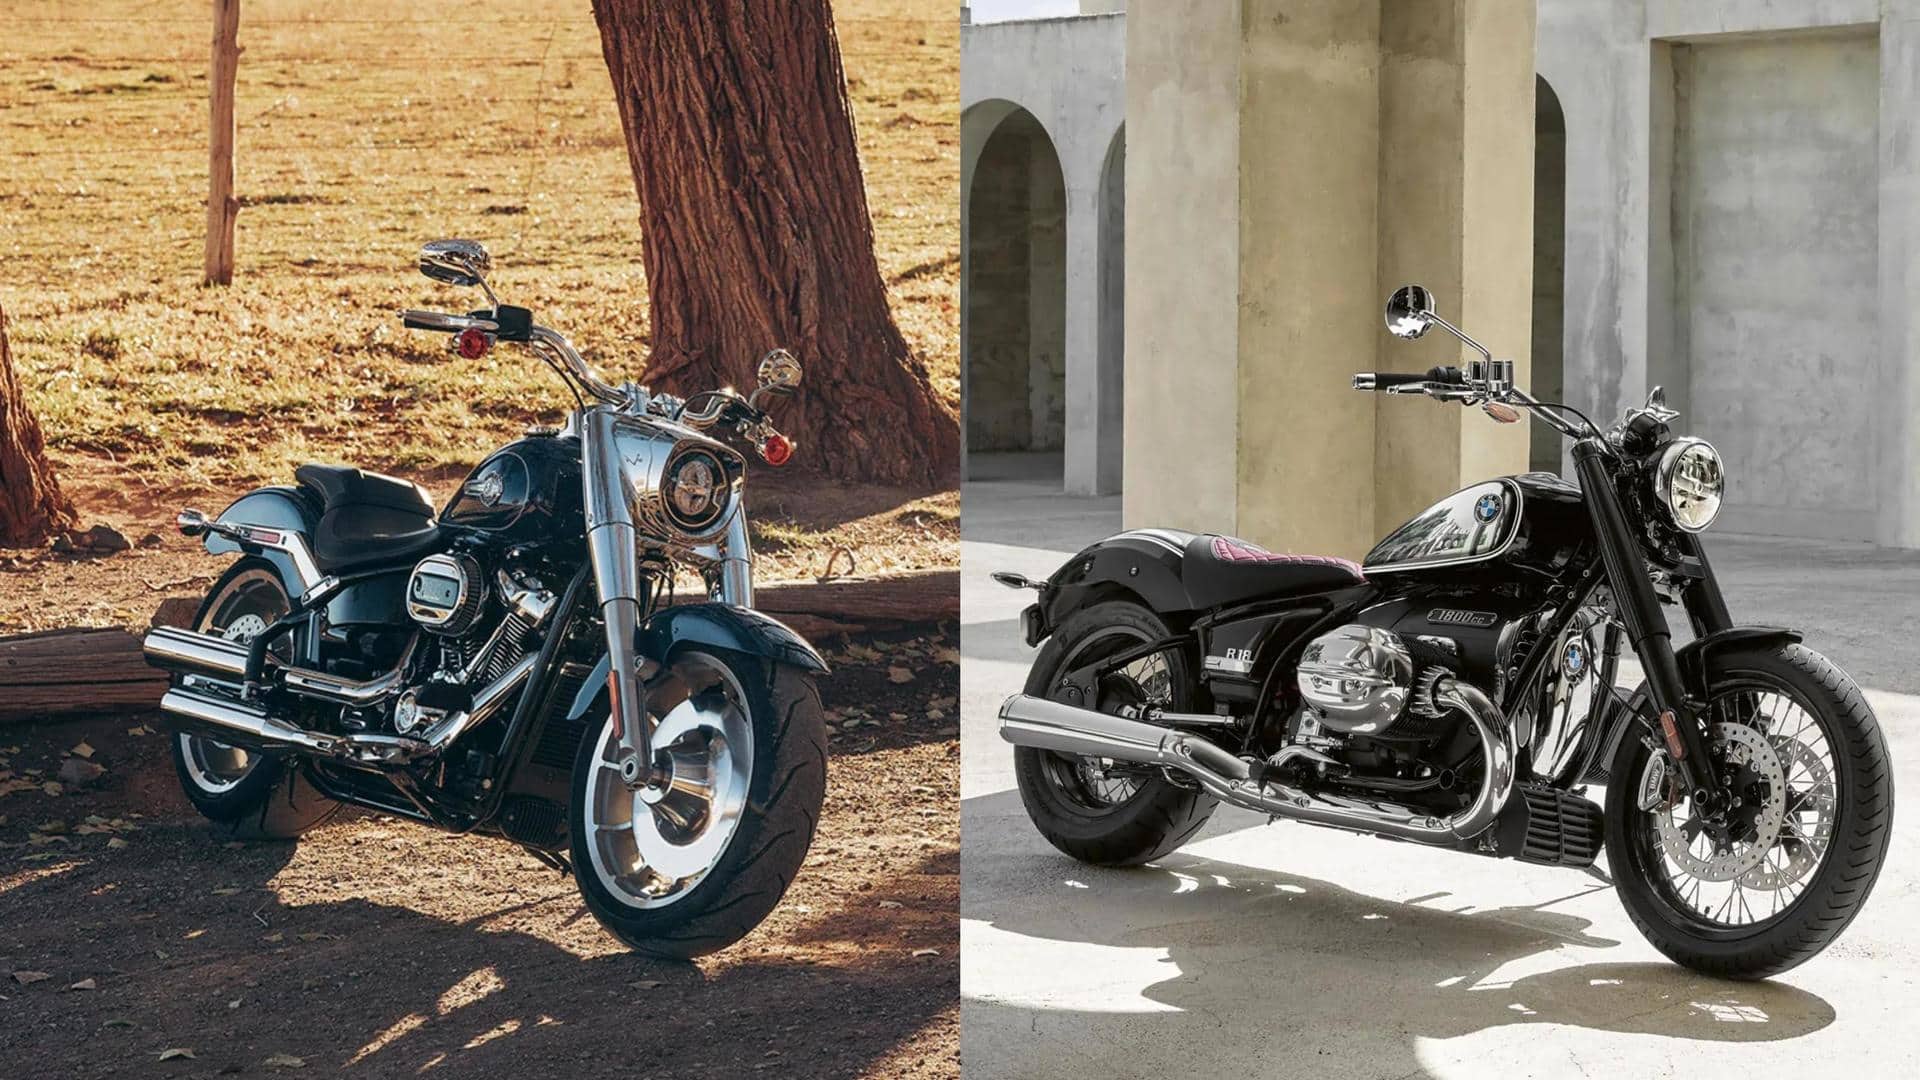 Harley-Davidson Fat Boy 114 v/s BMW R 18: Features compared